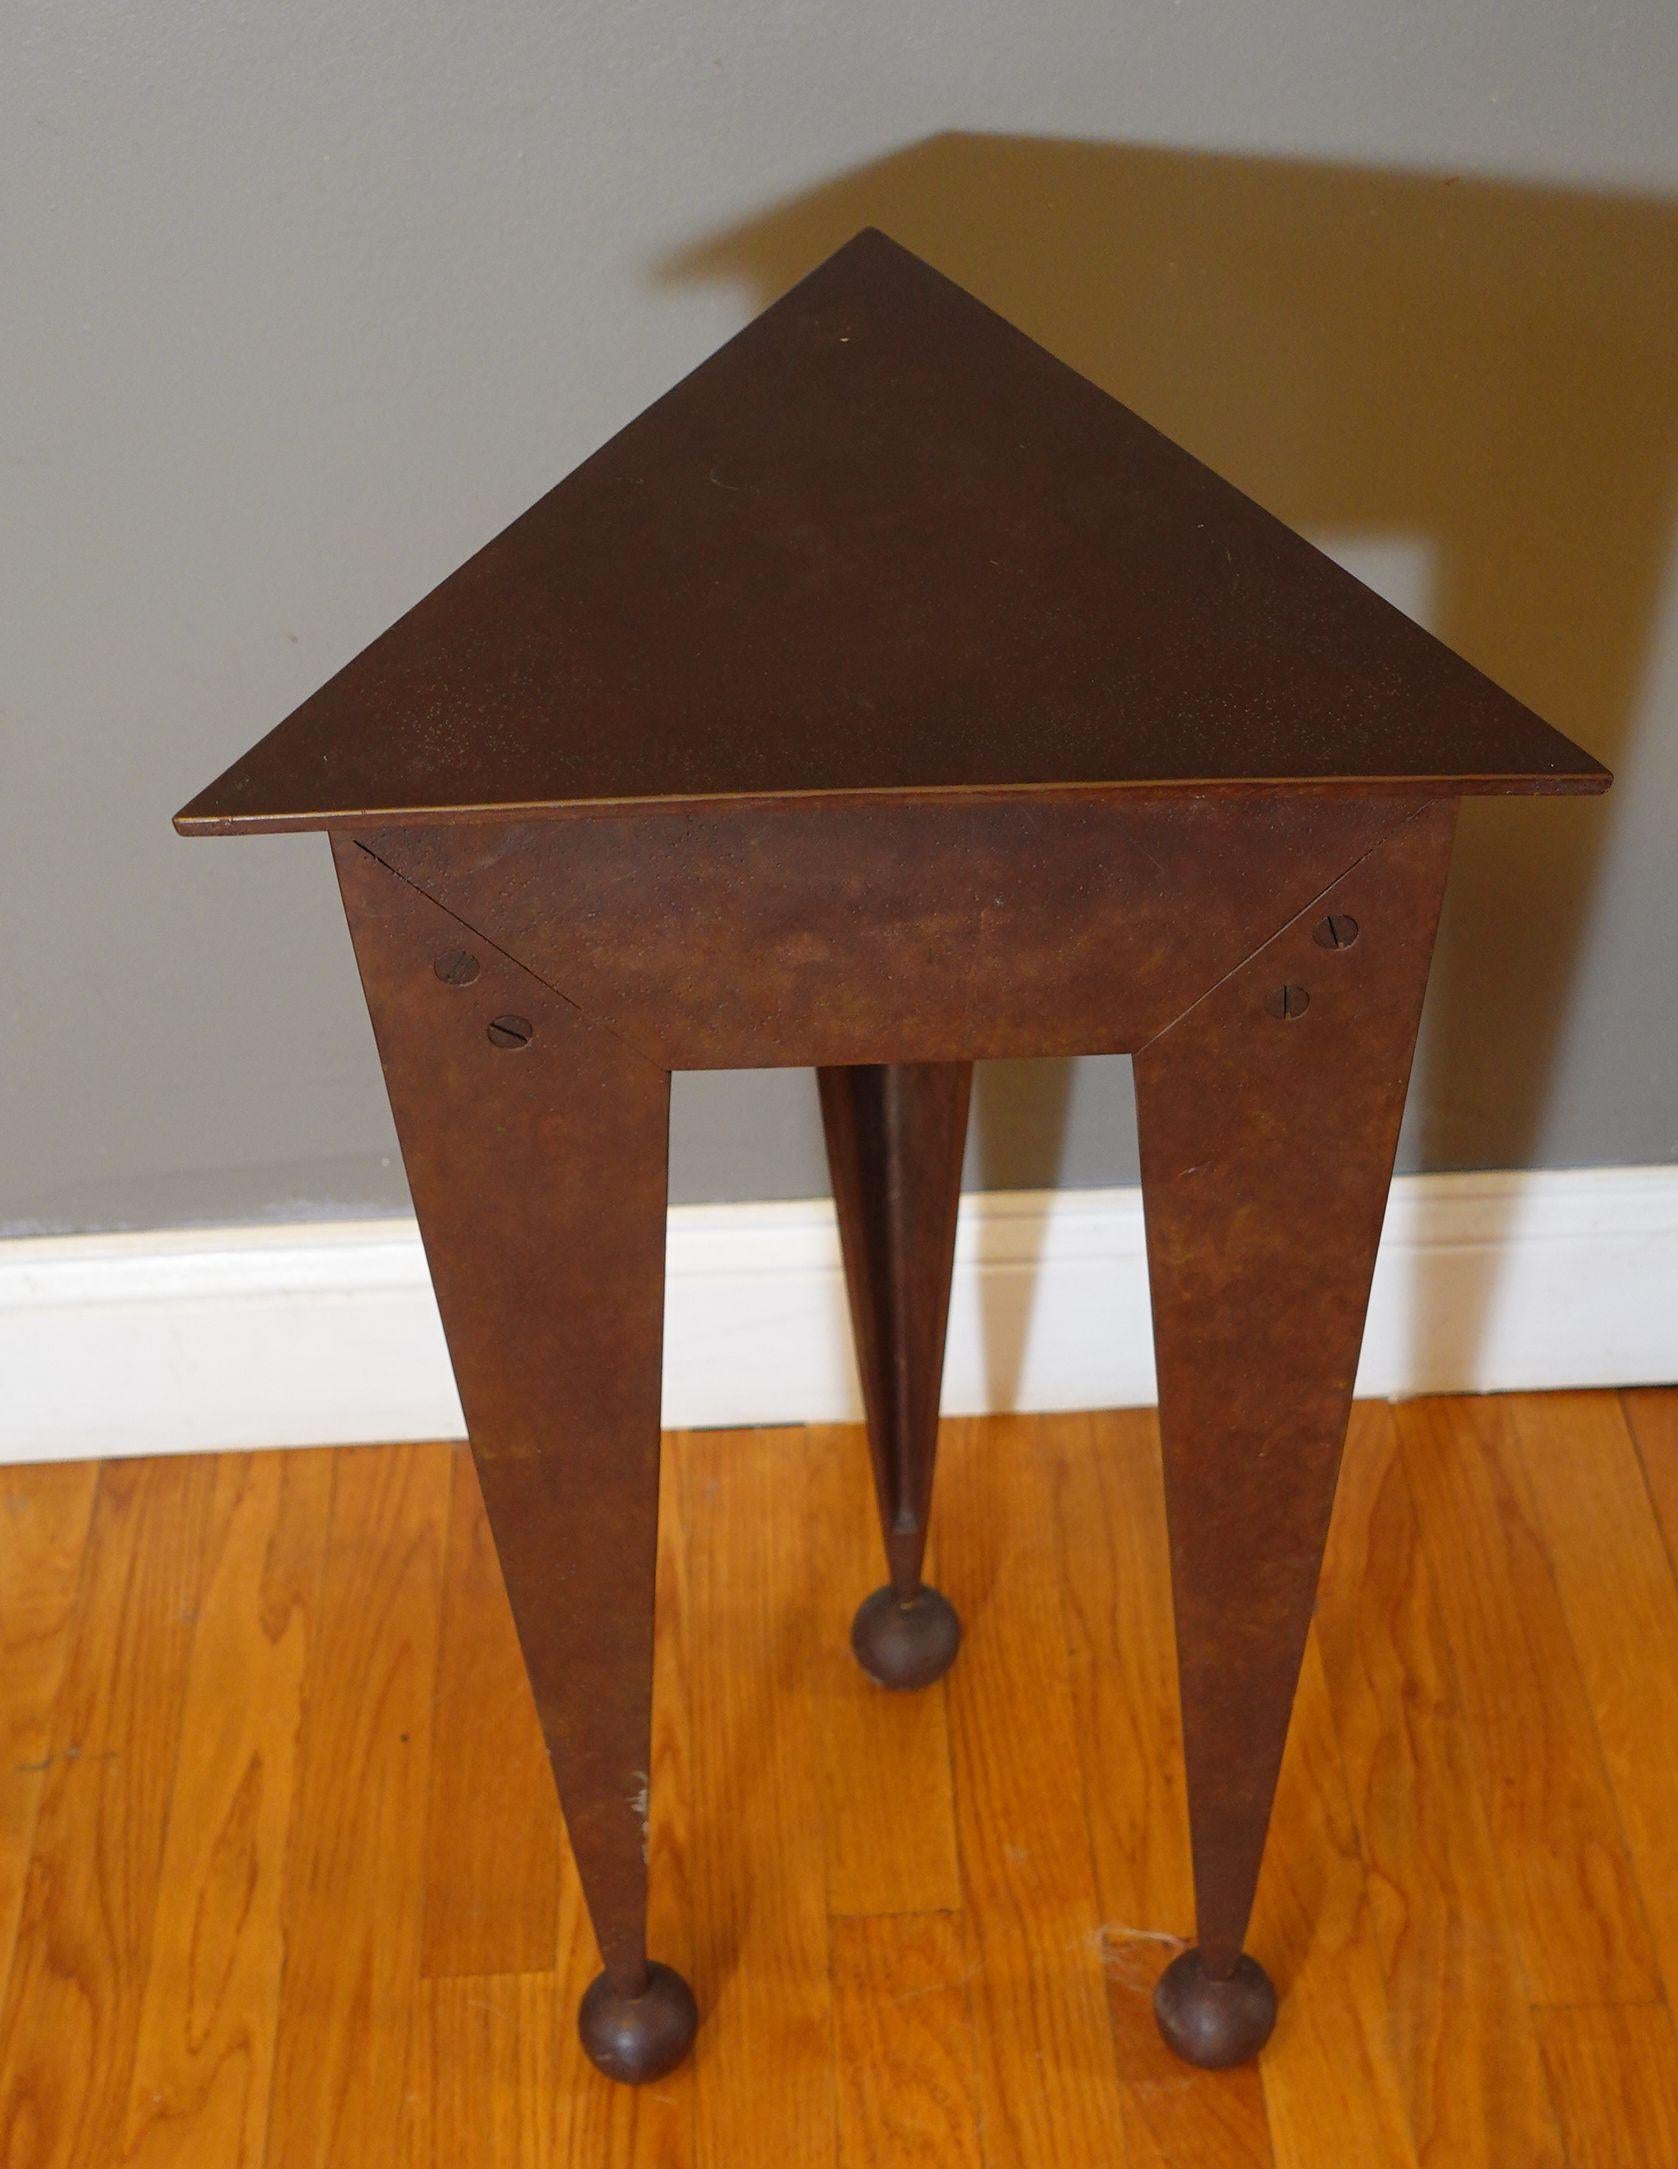 This is a heavy steel side table with a lifted top and a compartment under it.
A unique piece from the mid-century, very unusual form the era.